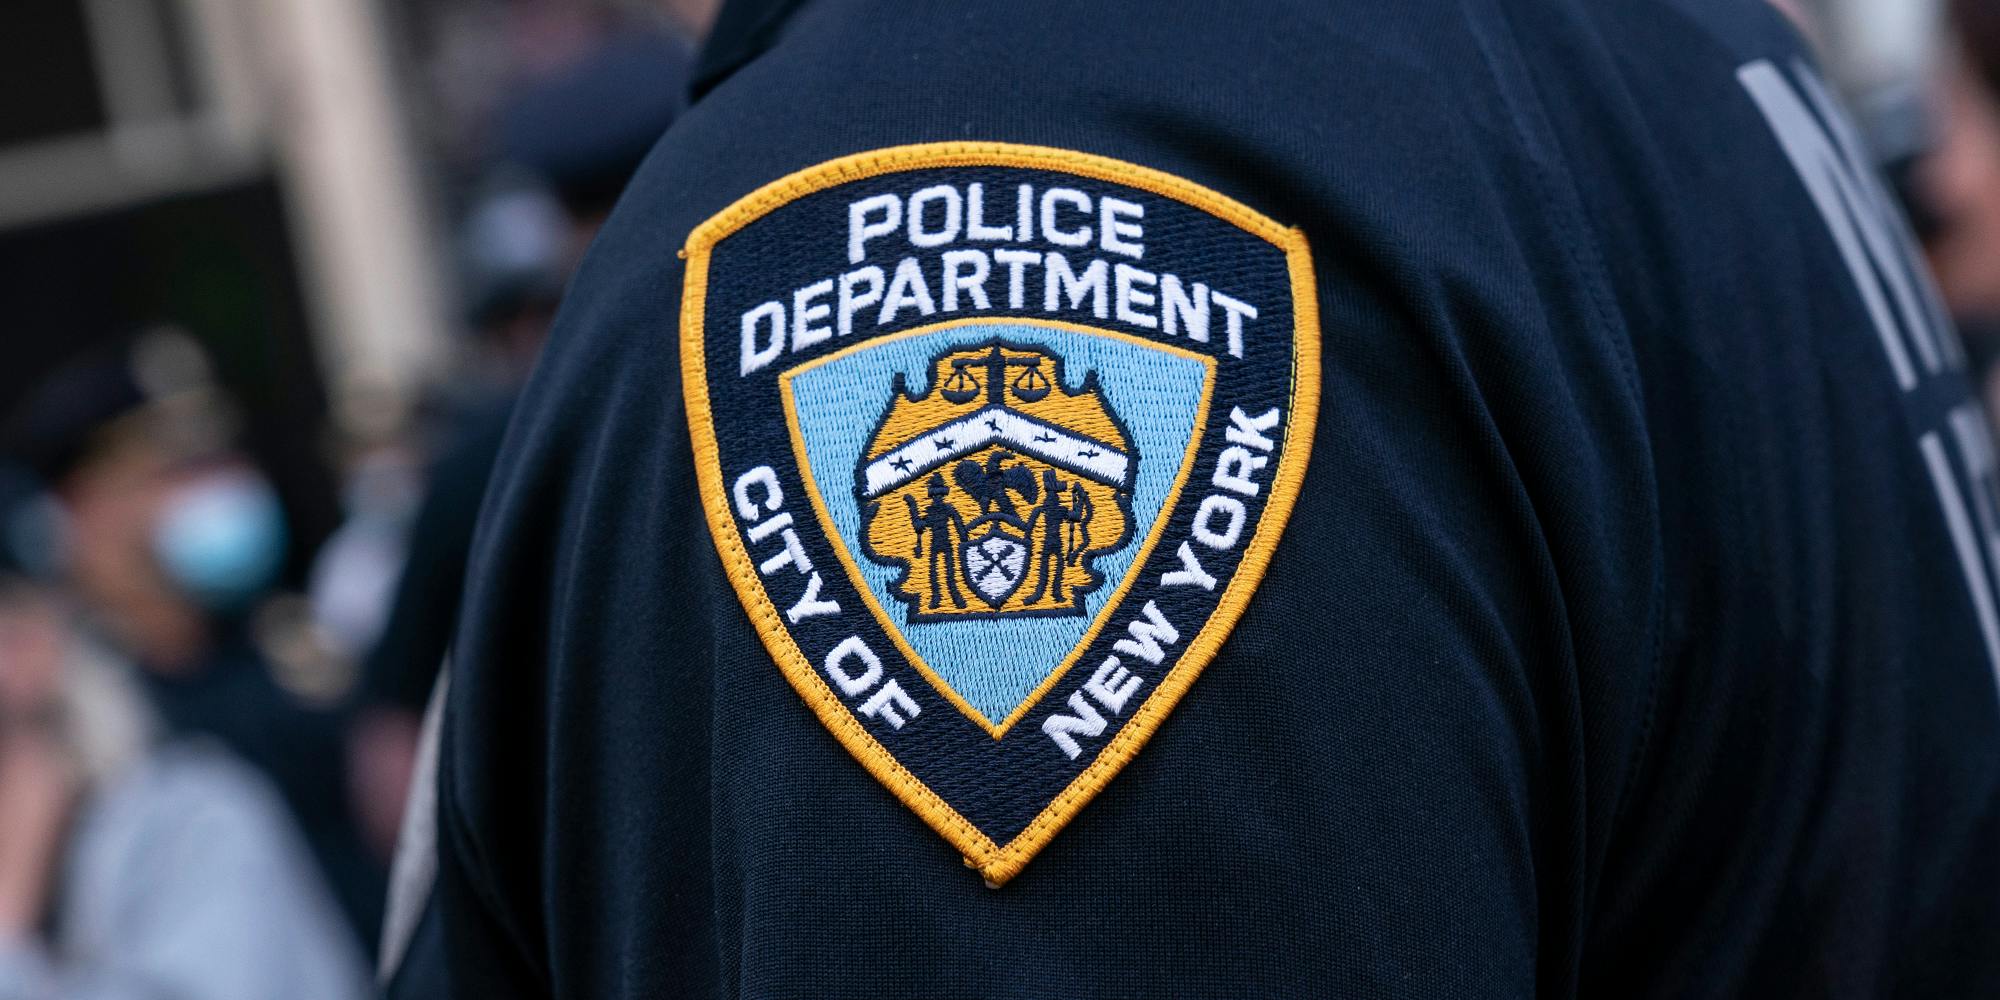 NYPD officer badge "Police Department City of New York"